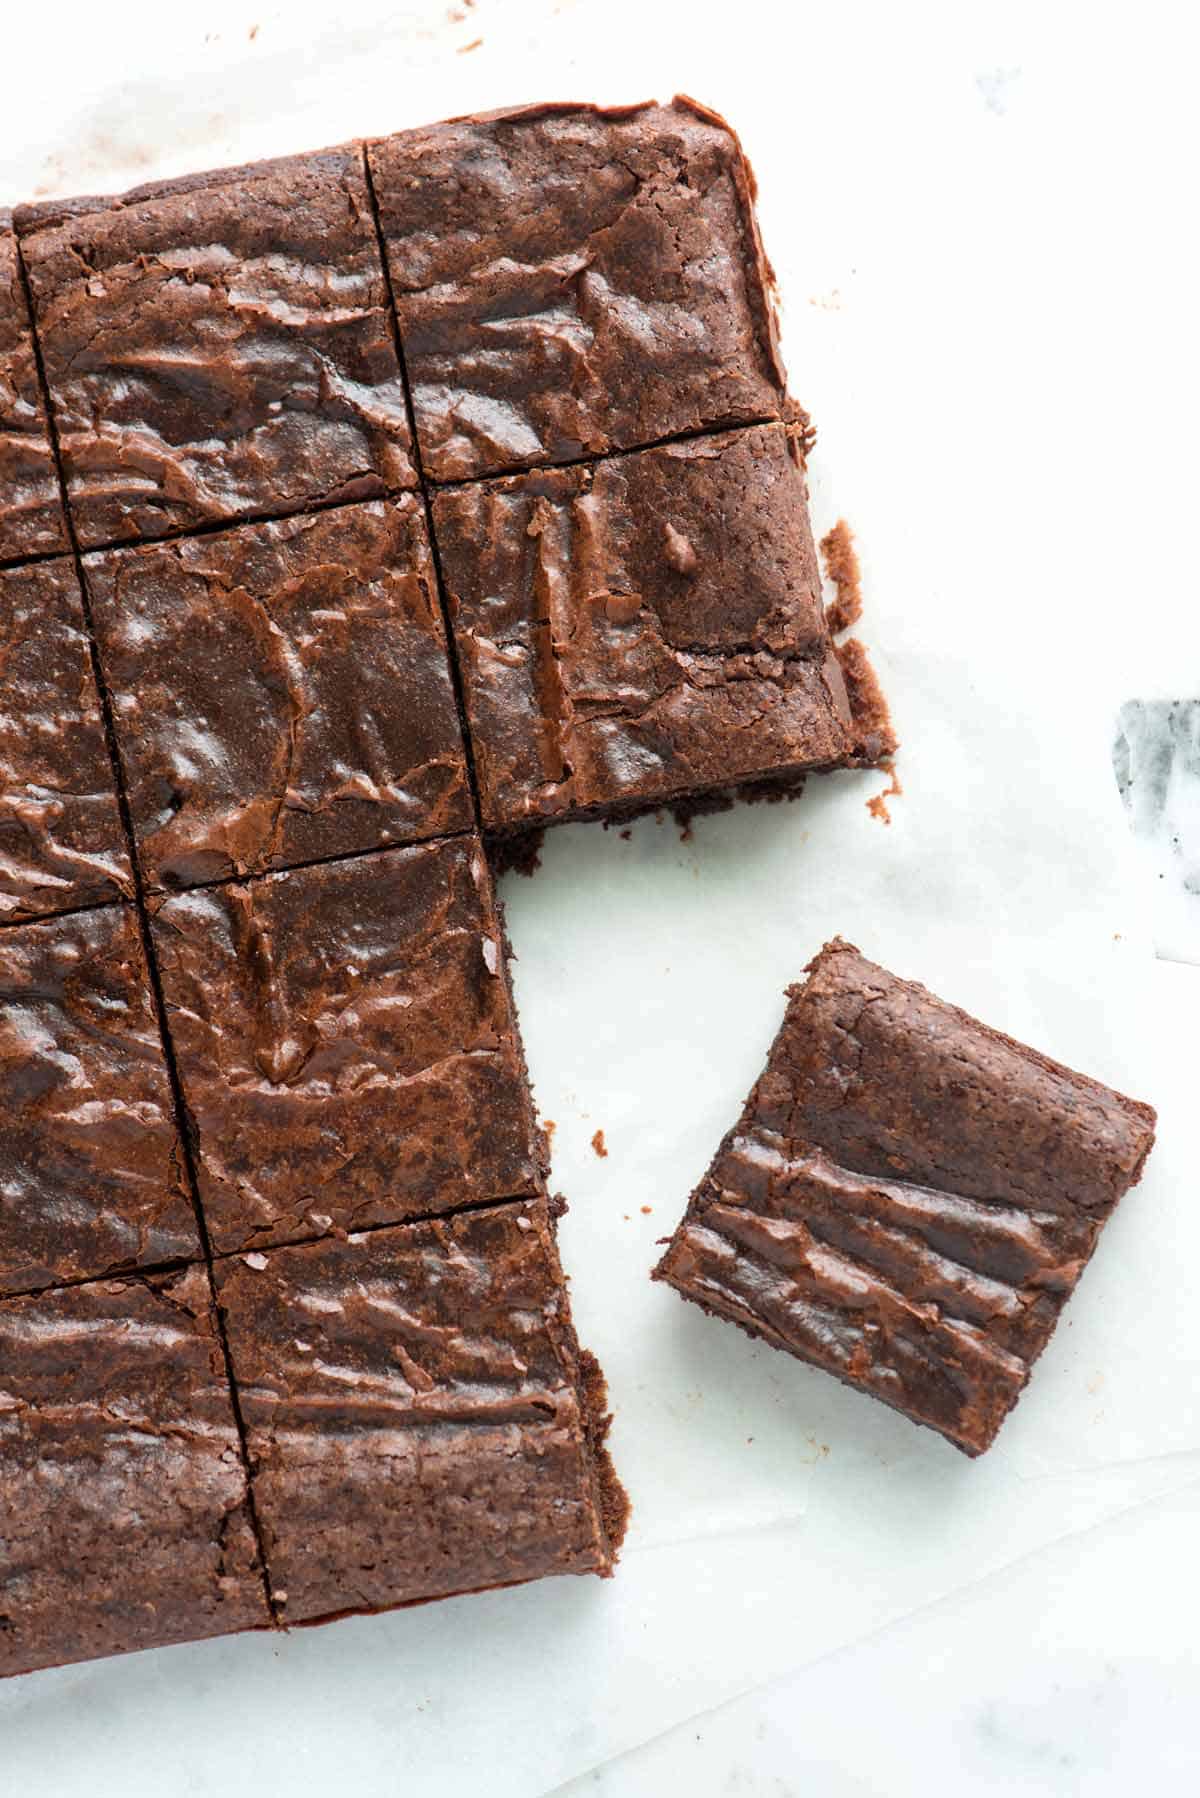 Perfect chocolate brownies with crinkly tops